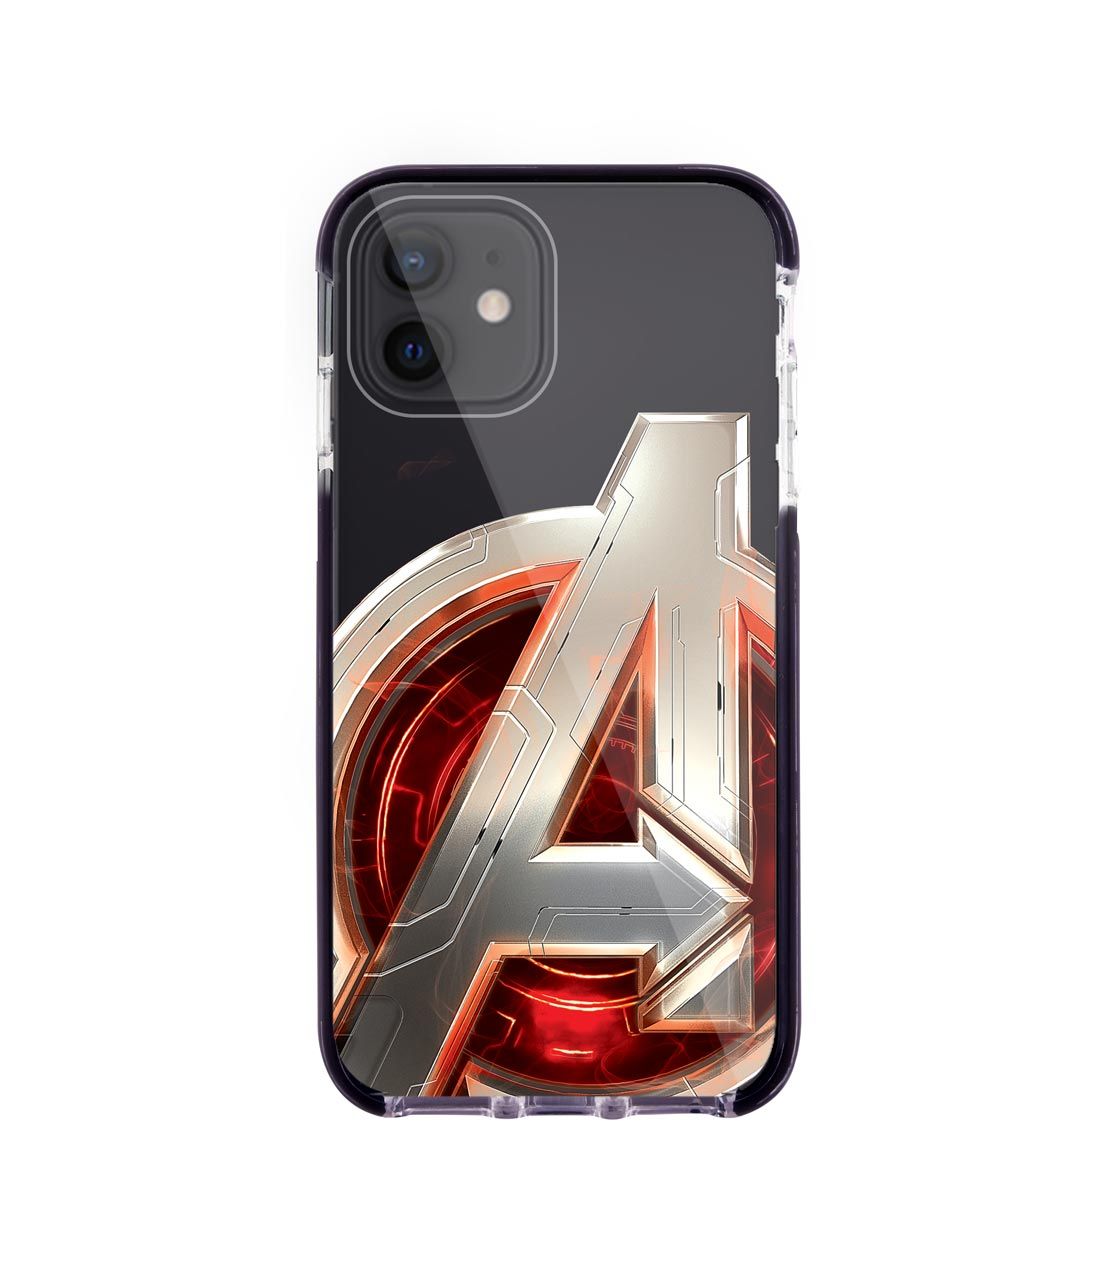 Avengers Version 2 - Extreme Case for iPhone 12